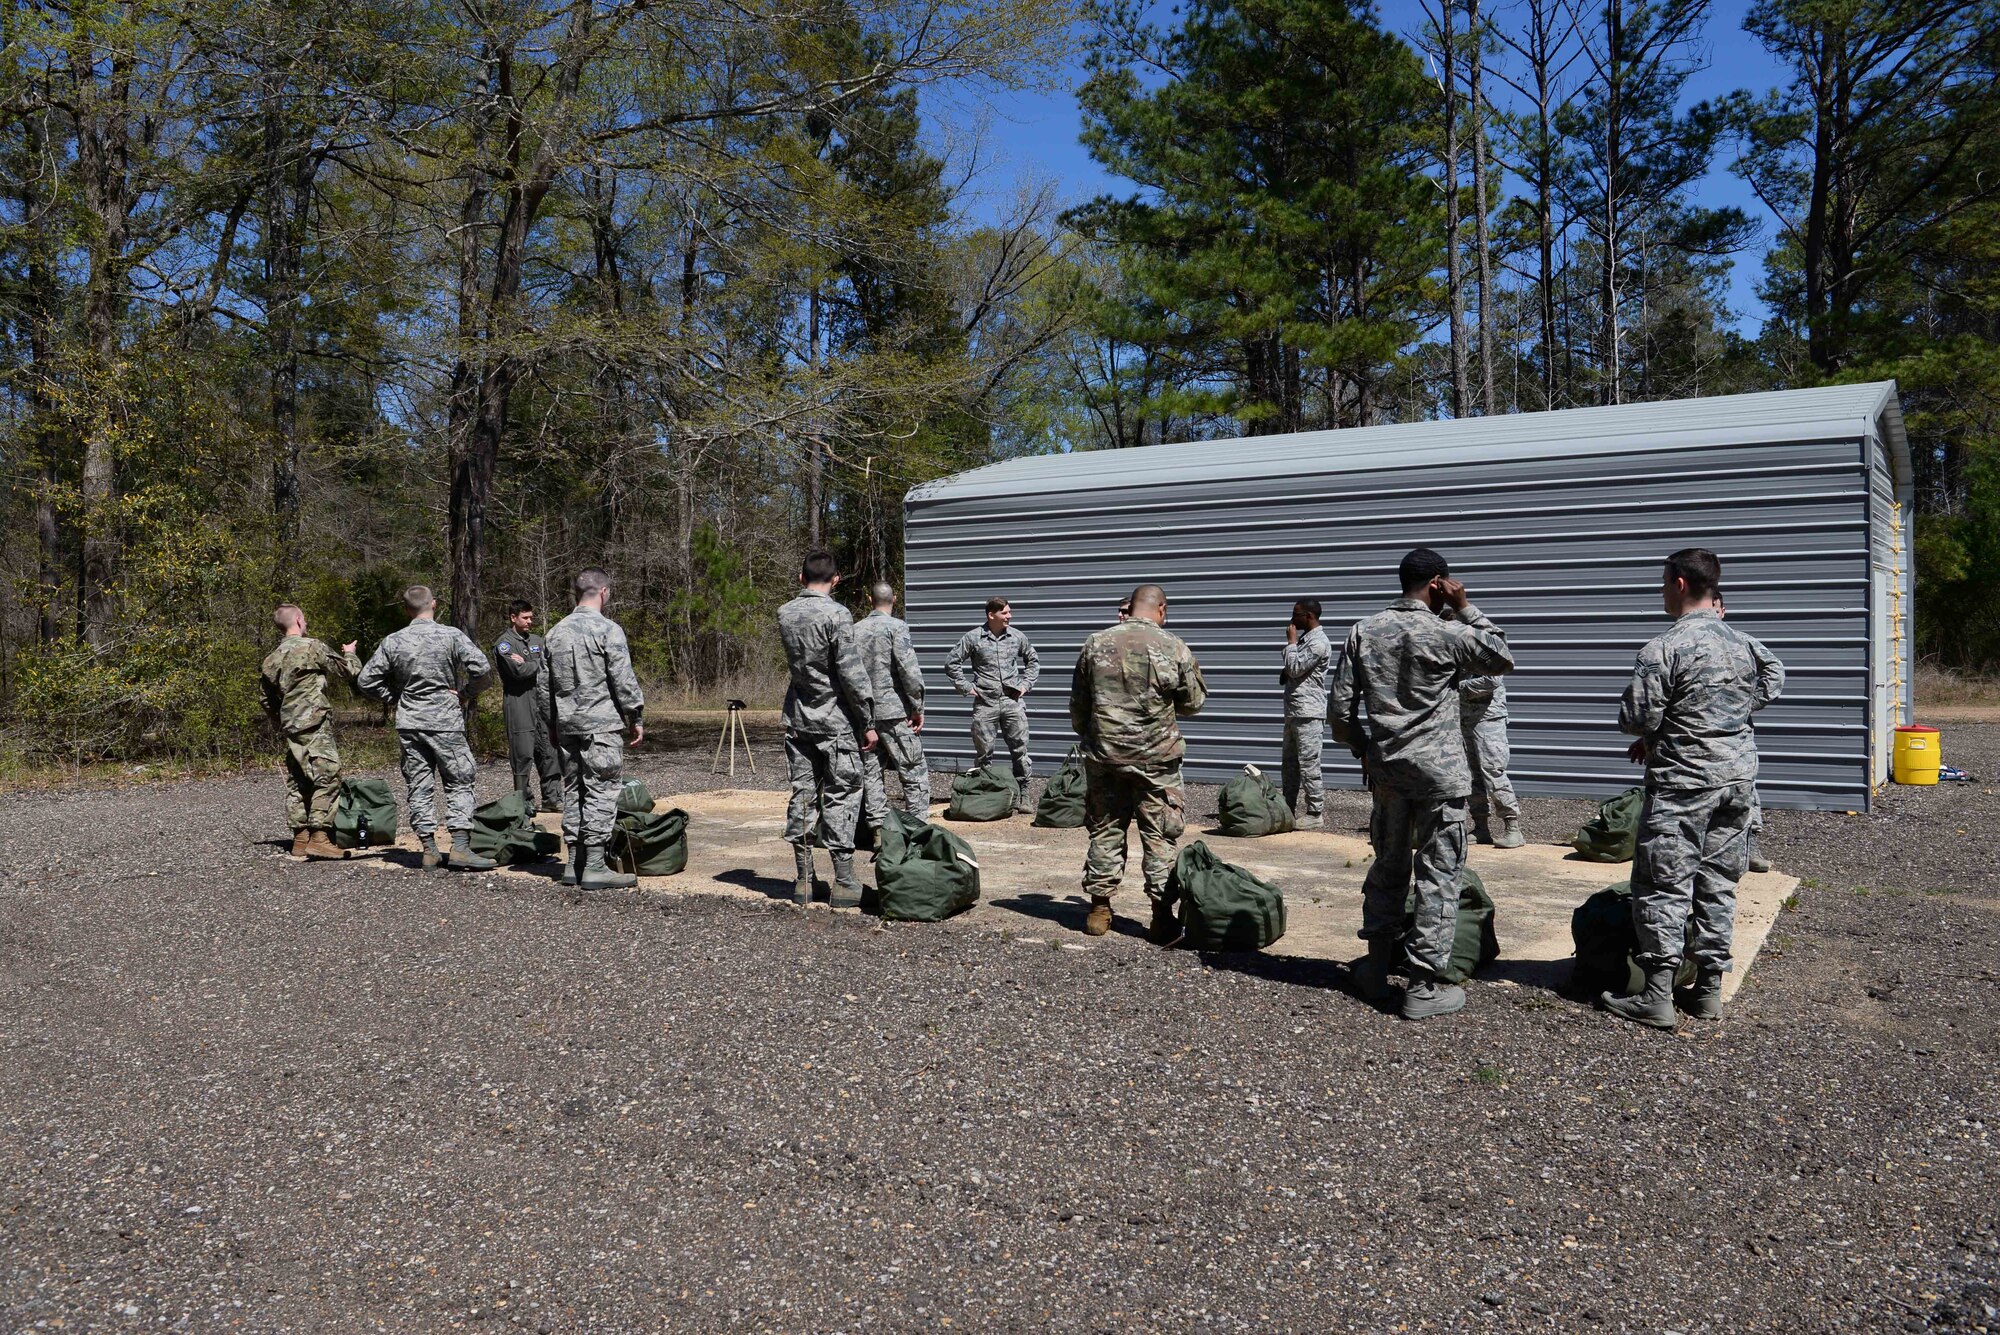 The first class for the Blaze Arena gas mask confidence chamber stands outside their bagged up gear, March 28, 2019, on Columbus Air Force Base, Miss. The 14th Civil Engineering Squadron worked the Blaze Arena operation for over a year and are one of two Air Education and Training Command bases with a gas mask confidence chamber. (U.S. Air Force photo by Airman 1st Class Jake Jacobsen)